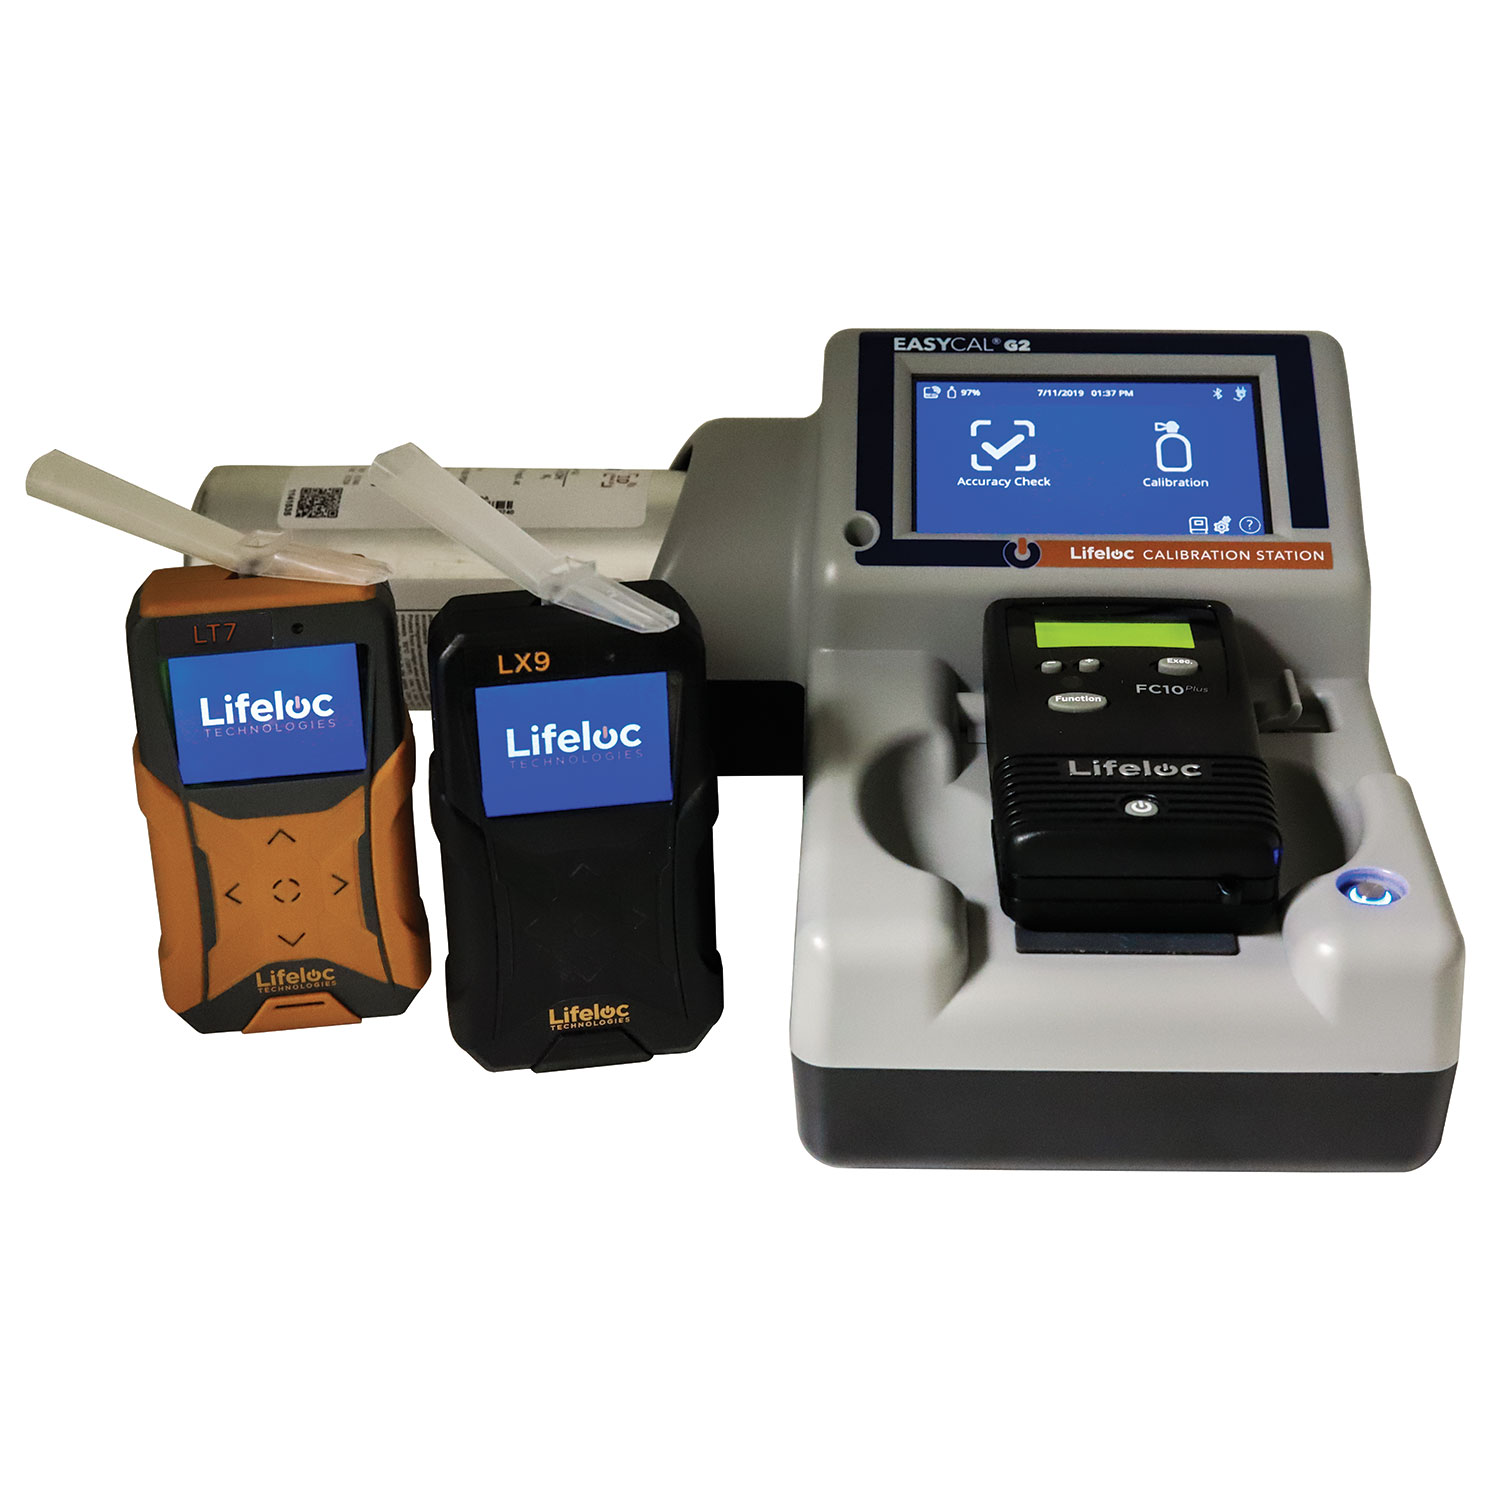 EASYCAL G2 Calibration Station with FC10, LX9 and LT7